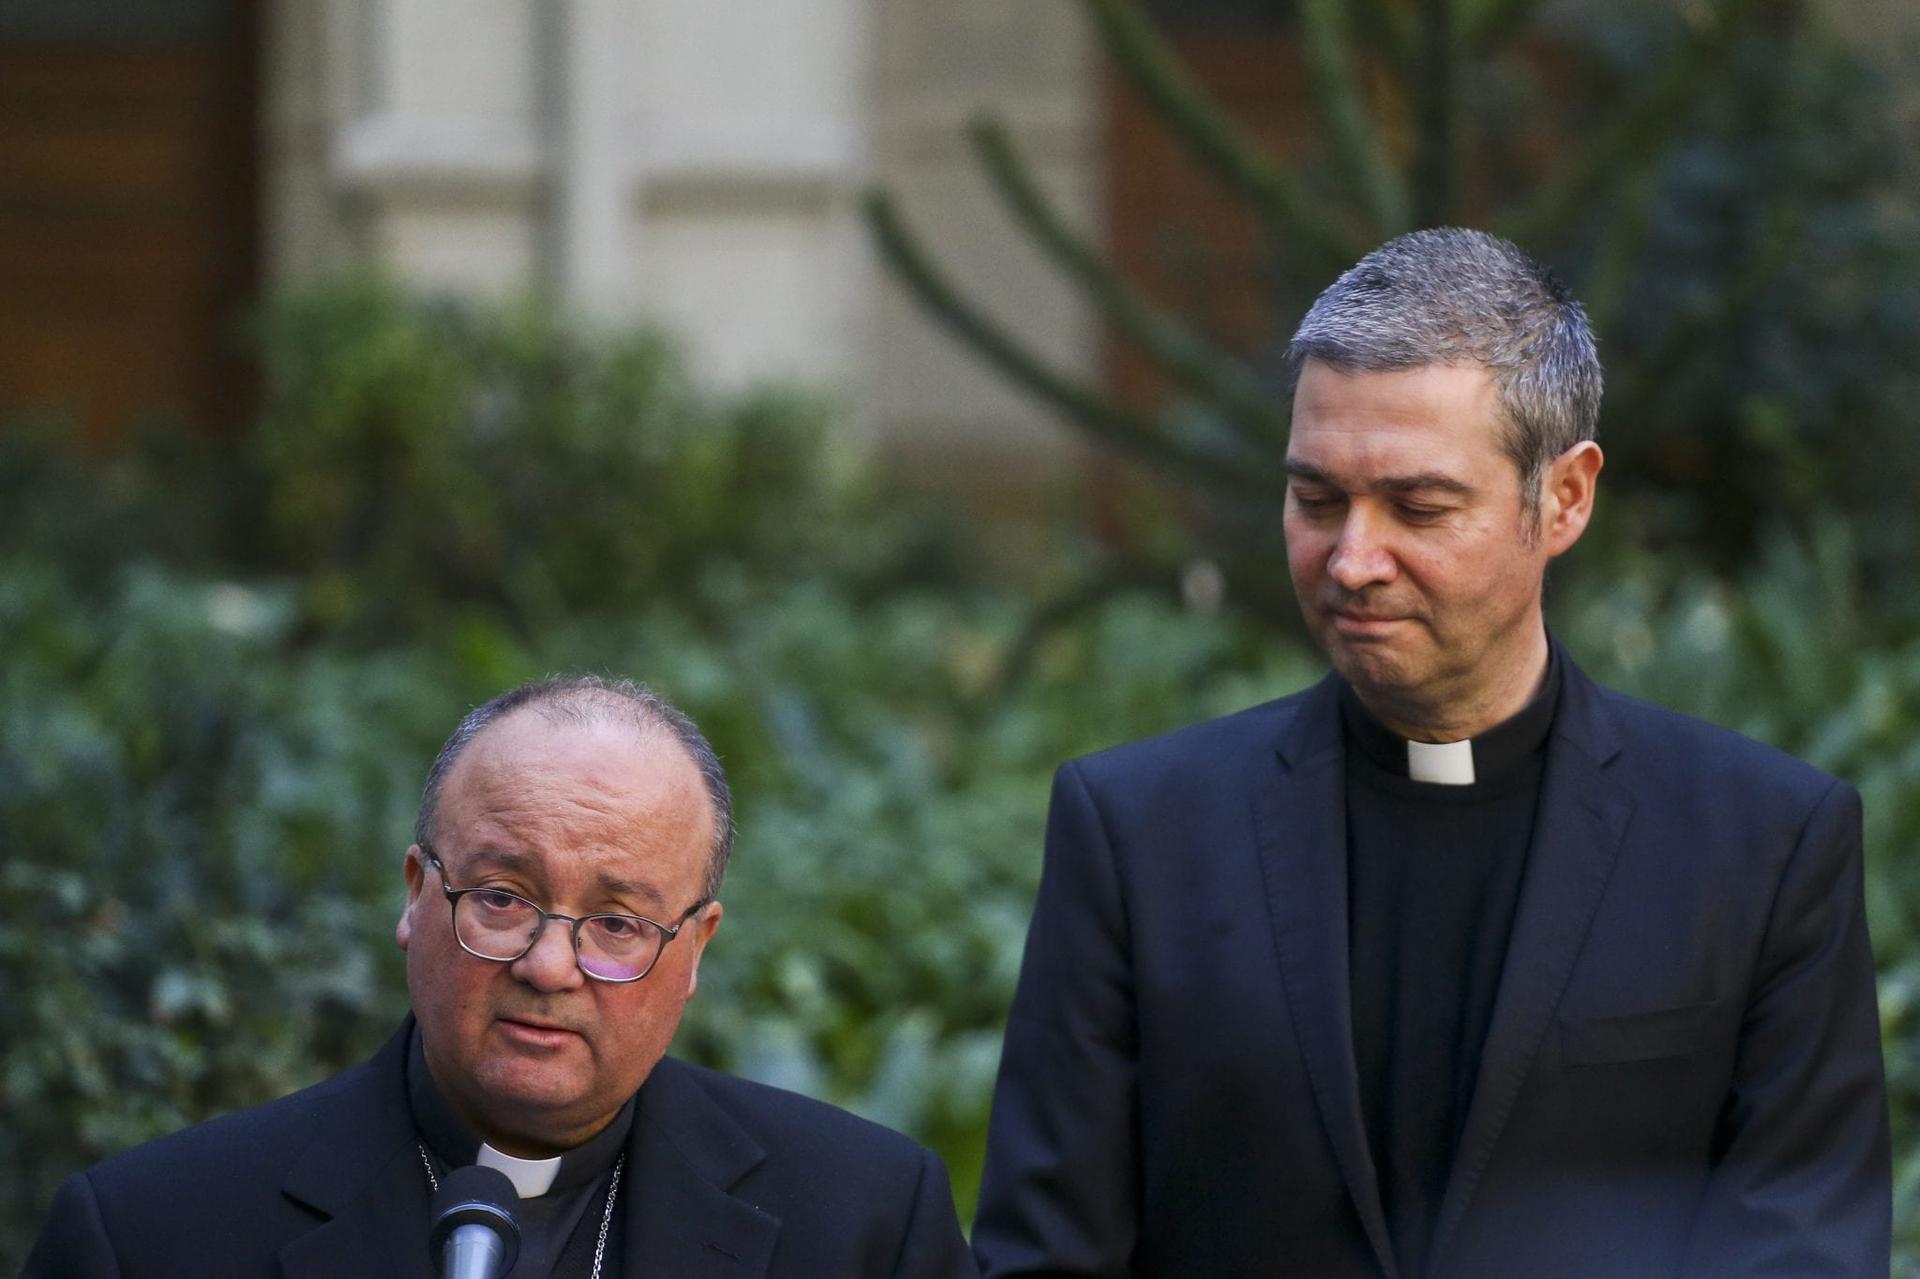 Top Vatican official says celibacy, homosexuality not cause of abuse crisis